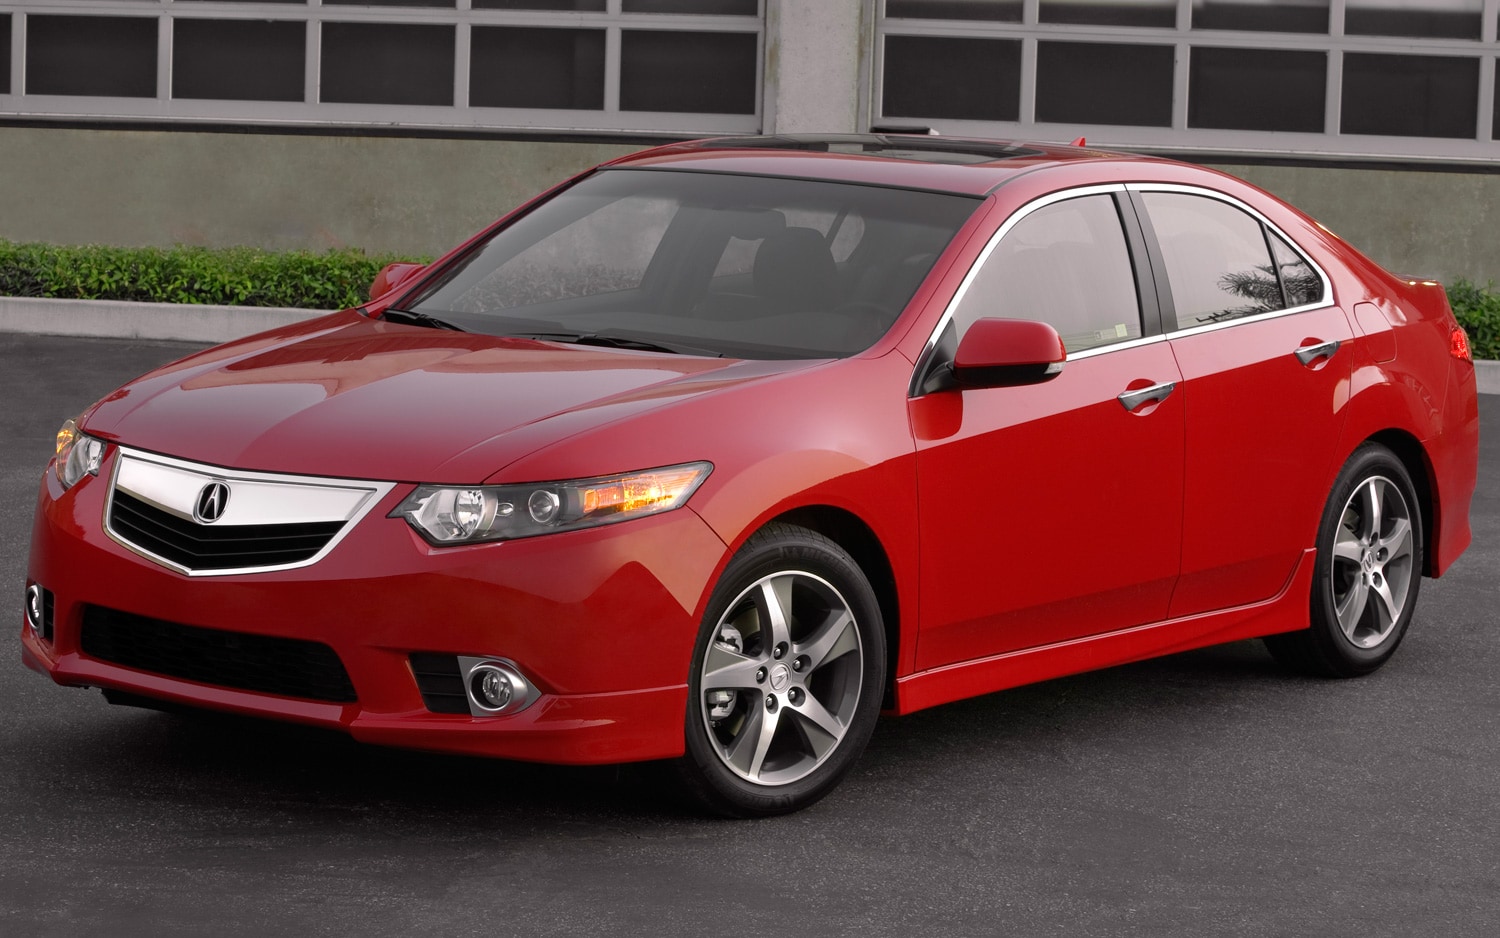 Integra Inspired? 2012 Acura TSX Special Edition Unveiled